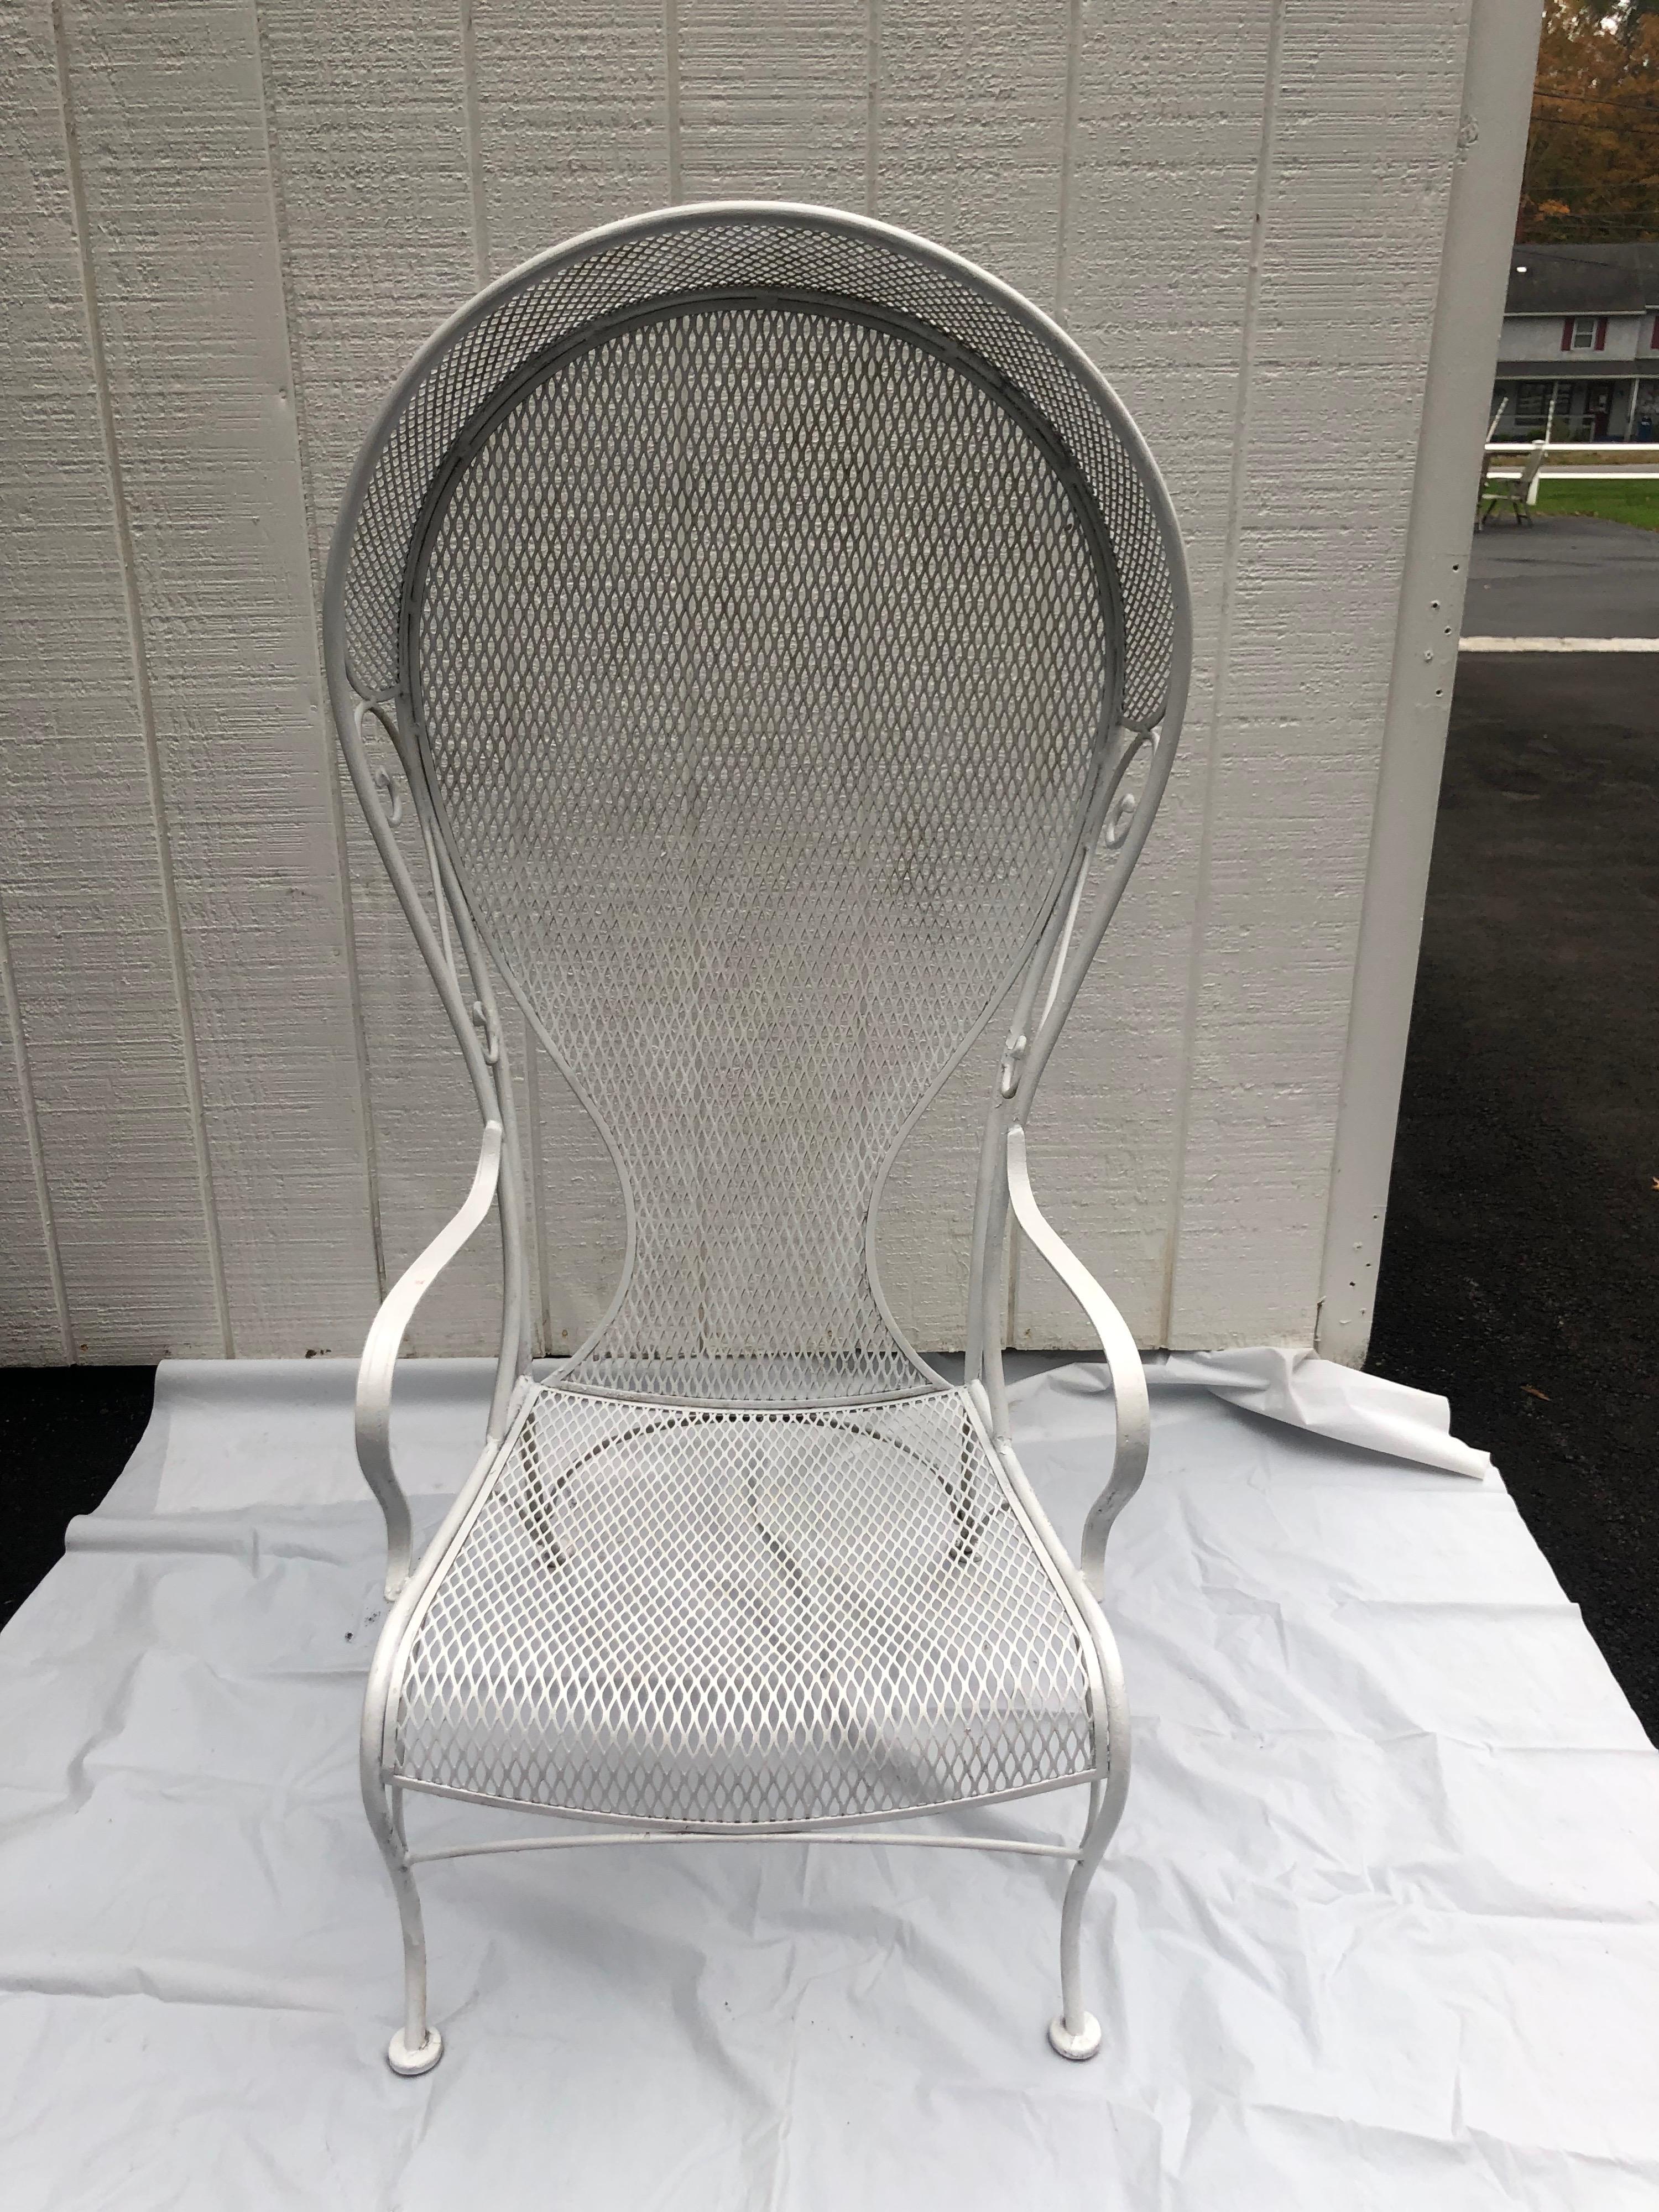 Rare Russell Woodard white iron Canopy chair. Perfect for that Palm Beach or Miami poolside seating. 
Or be dramatic and use it indoors. Classic and timeless Hollywood Regency Dorothy Draper style. 
Measures: Height: 56 in. 
Width: 28 in.
Depth: